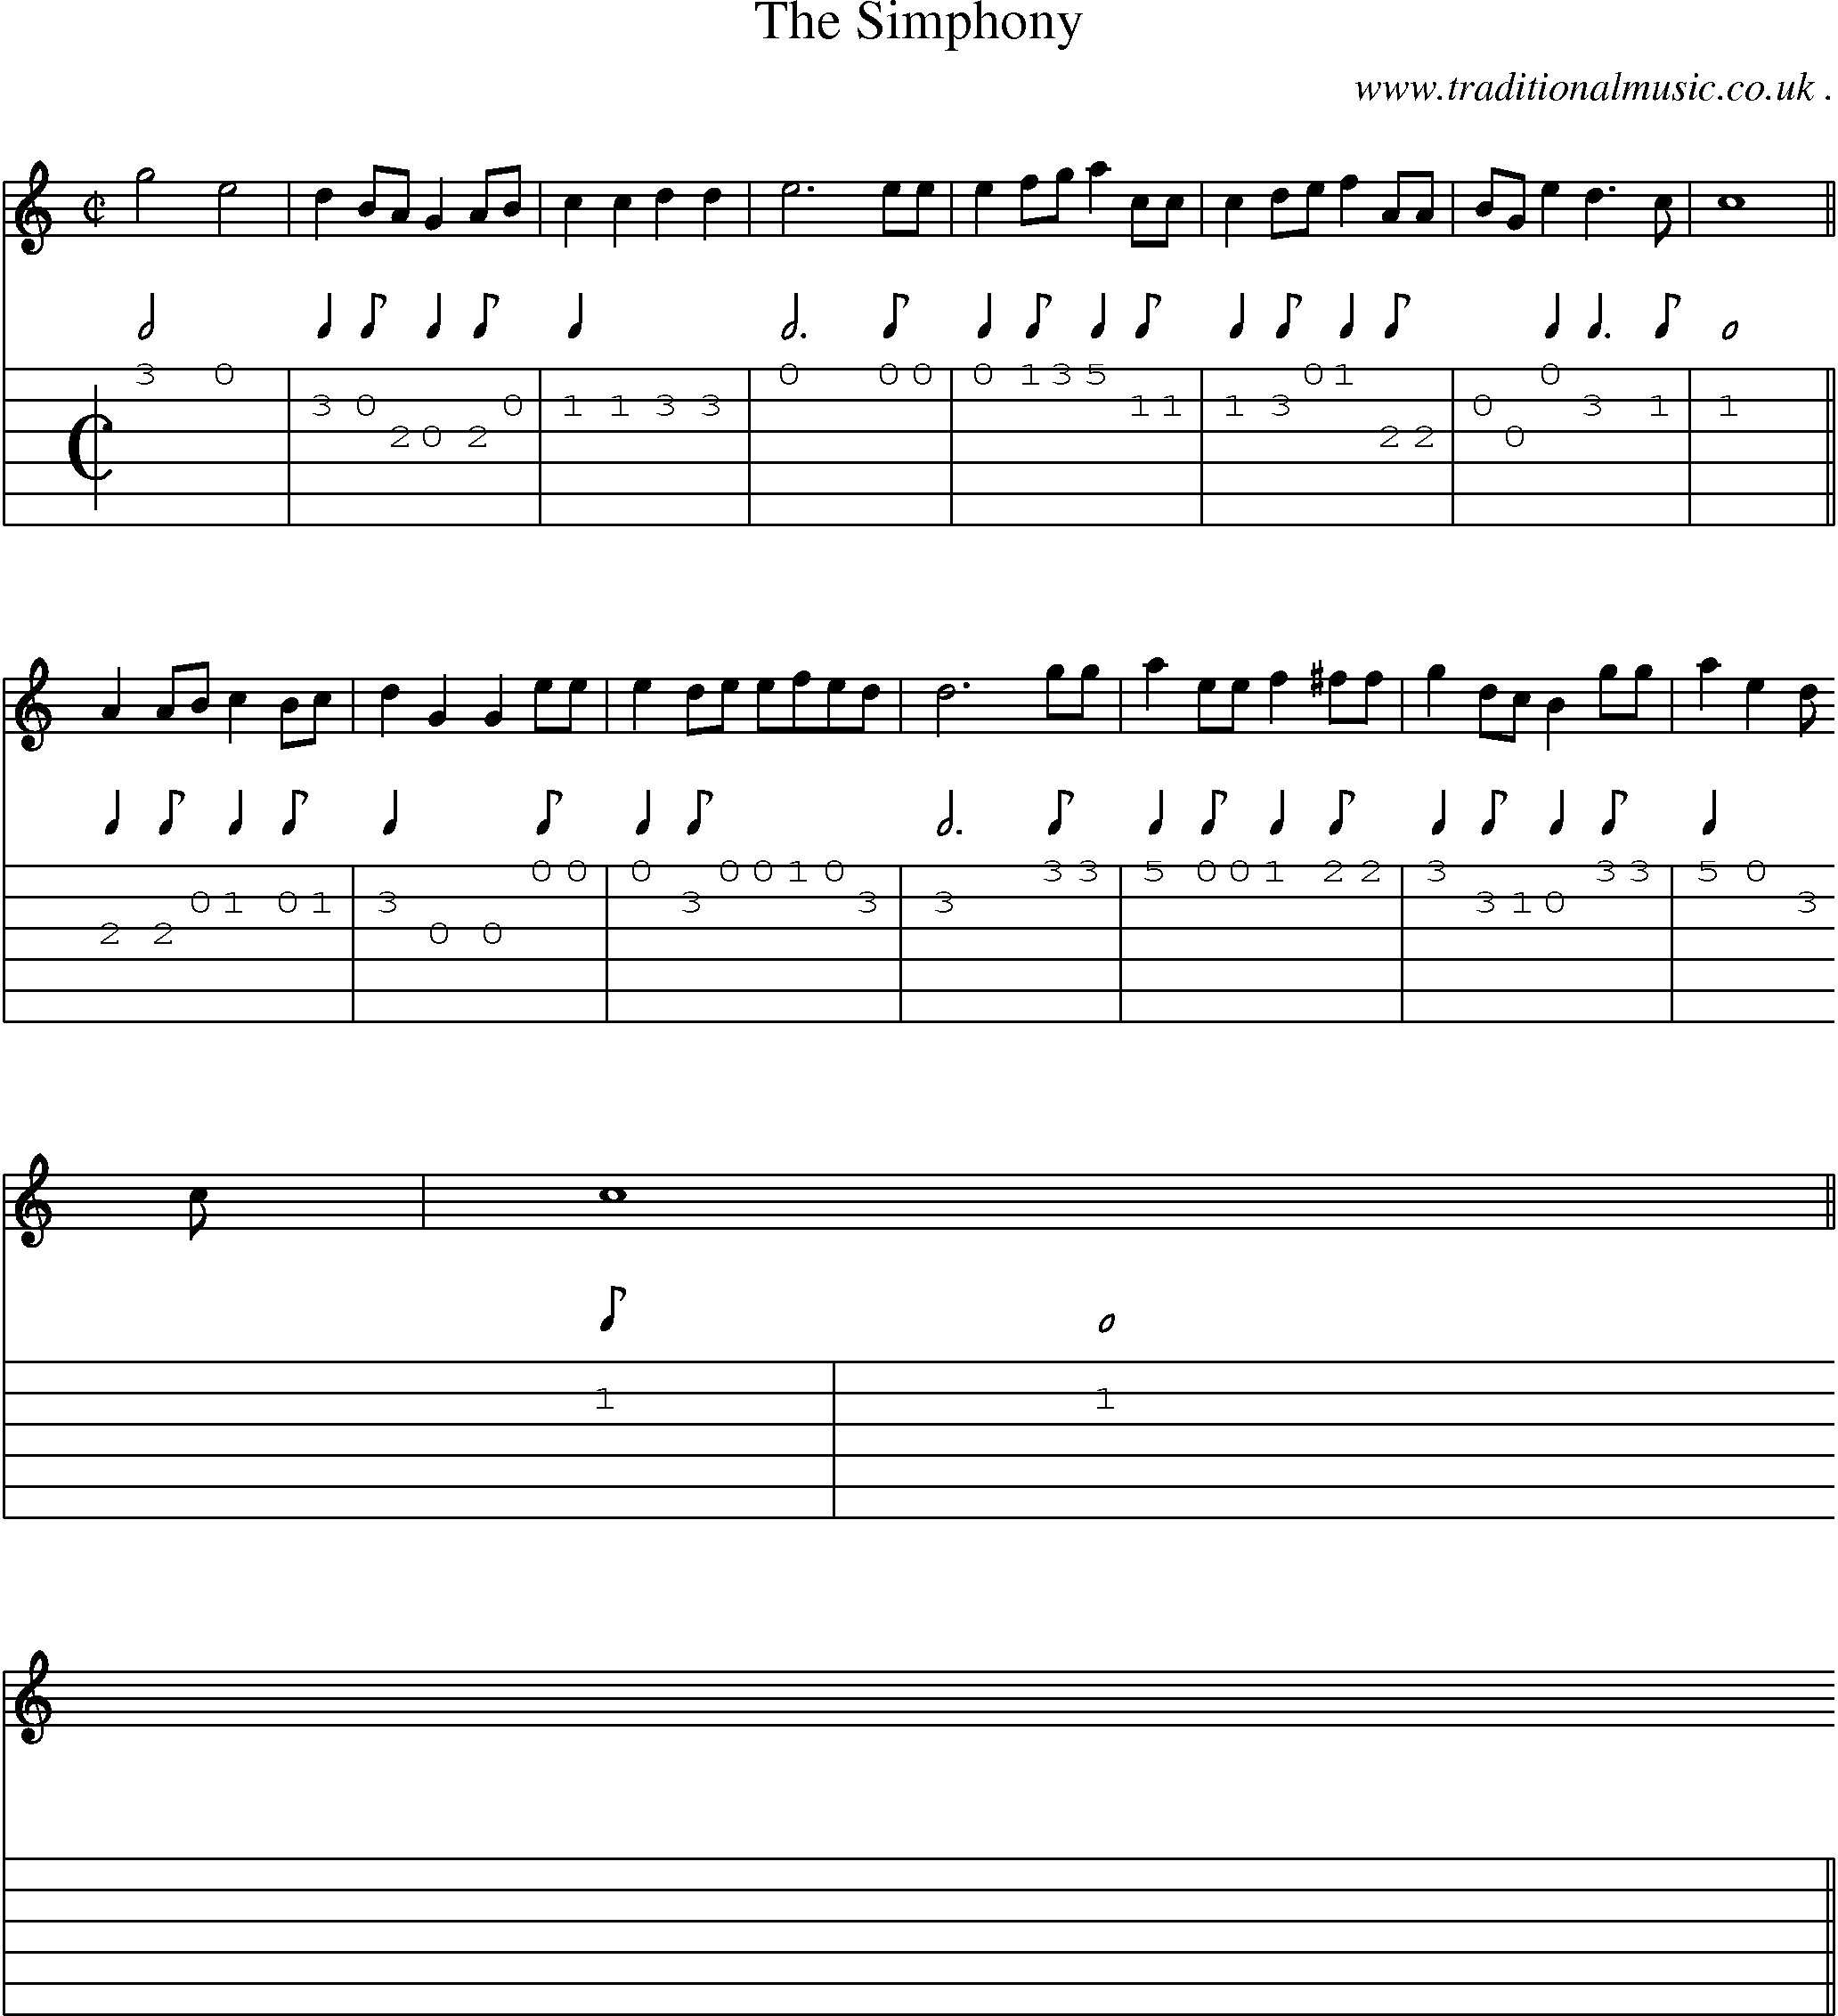 Sheet-Music and Guitar Tabs for The Simphony